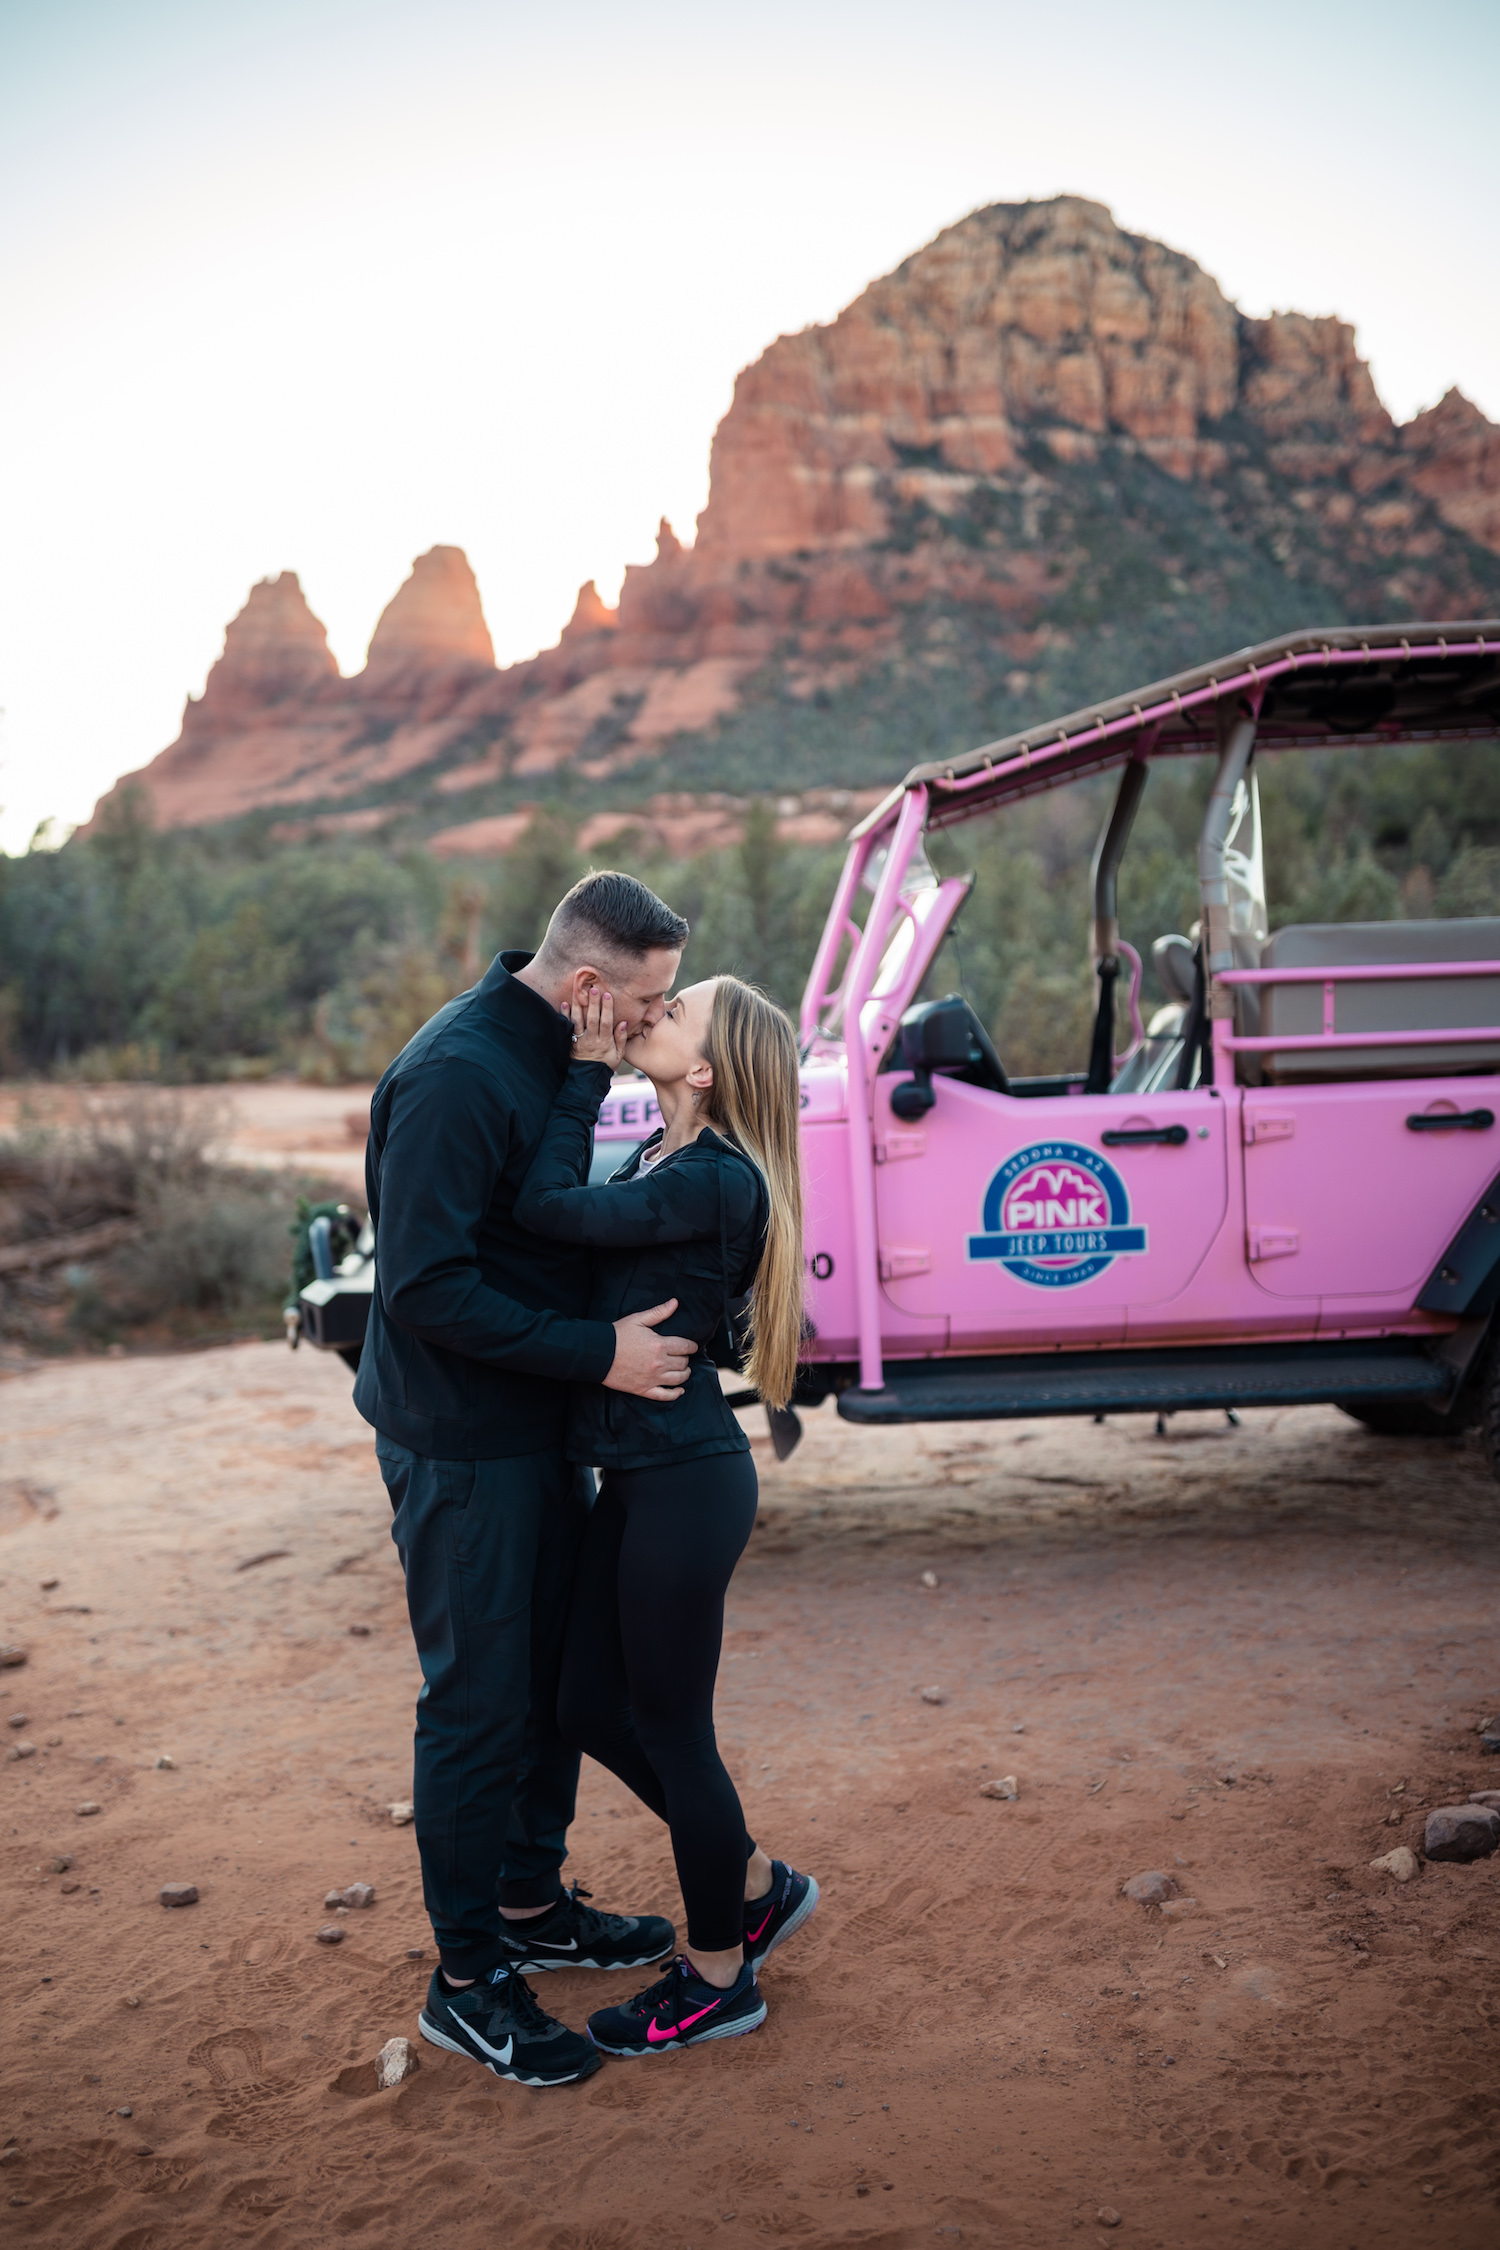 Newly engaged couple sharing a kiss in front of the Pink Jeep during their proposal, photographed by Makayla MacGarvey